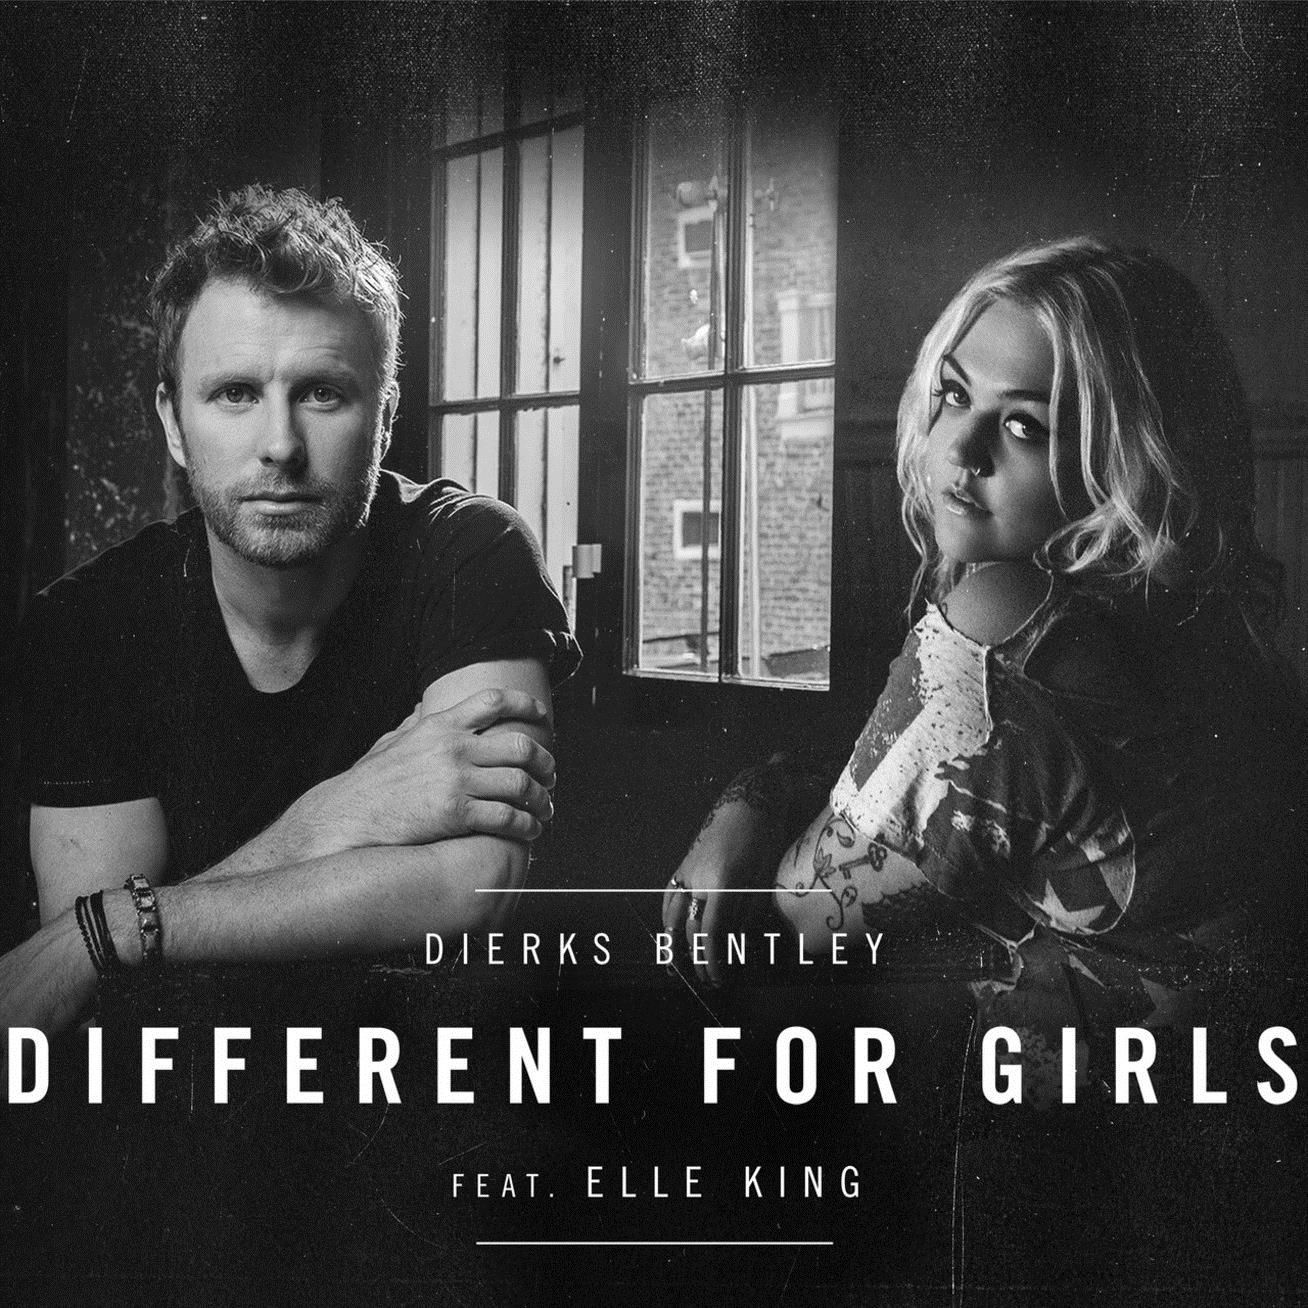 DIERKS BENTLEY REVEALS A NEW LAYER OF RELATIONSHIP ALBUM BLACK  WITH THE RELEASE OF “DIFFERENT FOR GIRLS” FEATURING ELLE KING